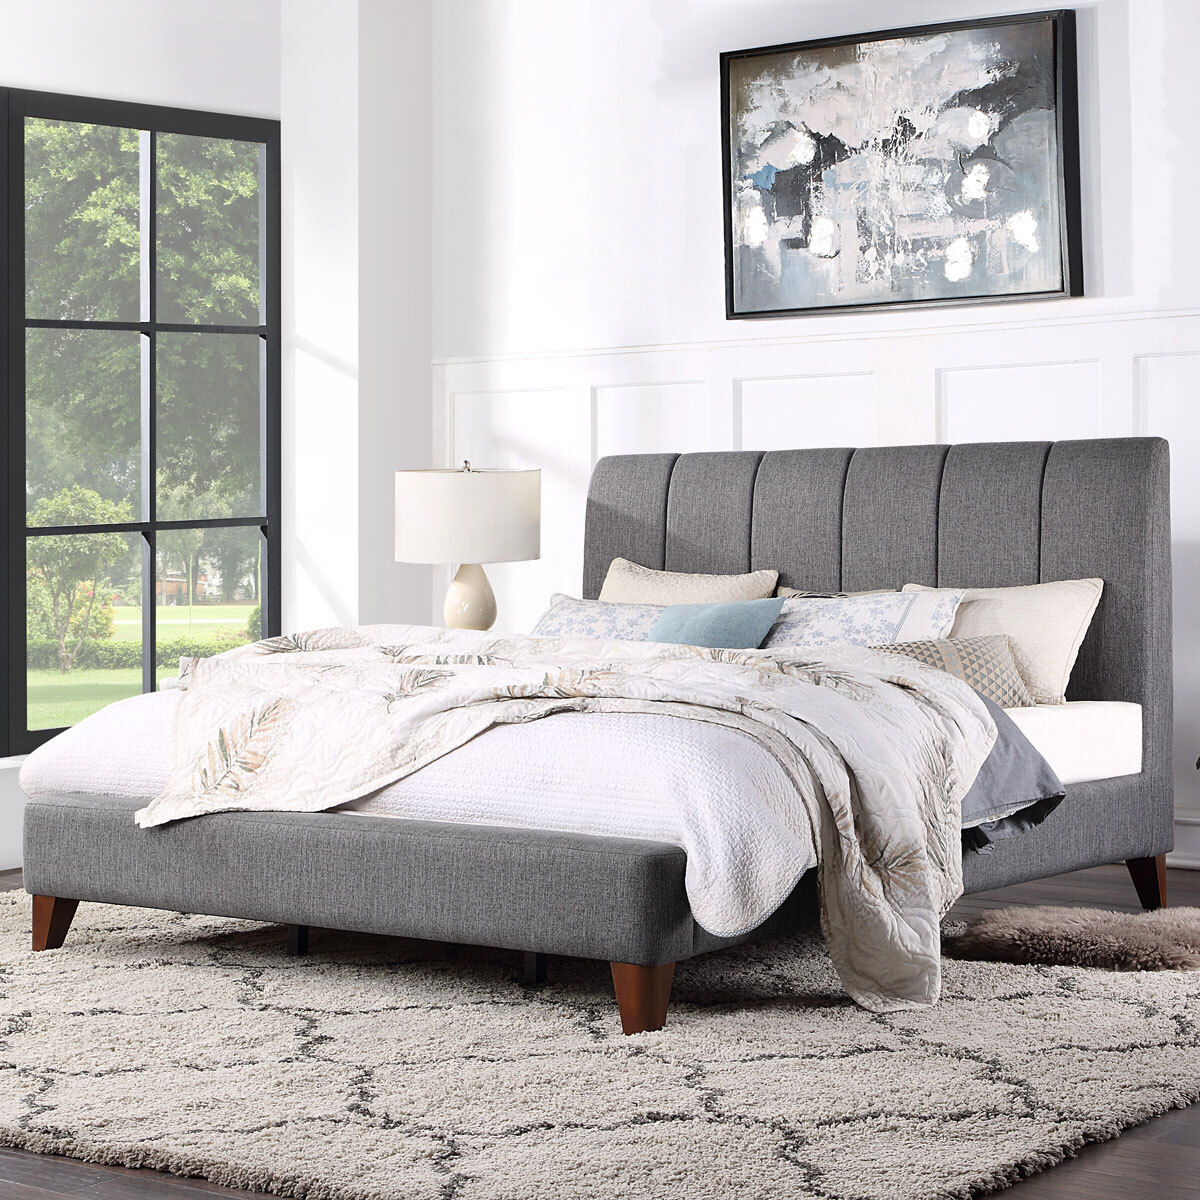 Grey Upholstered Bed Frame, Costco King Bed Frame And Headboard